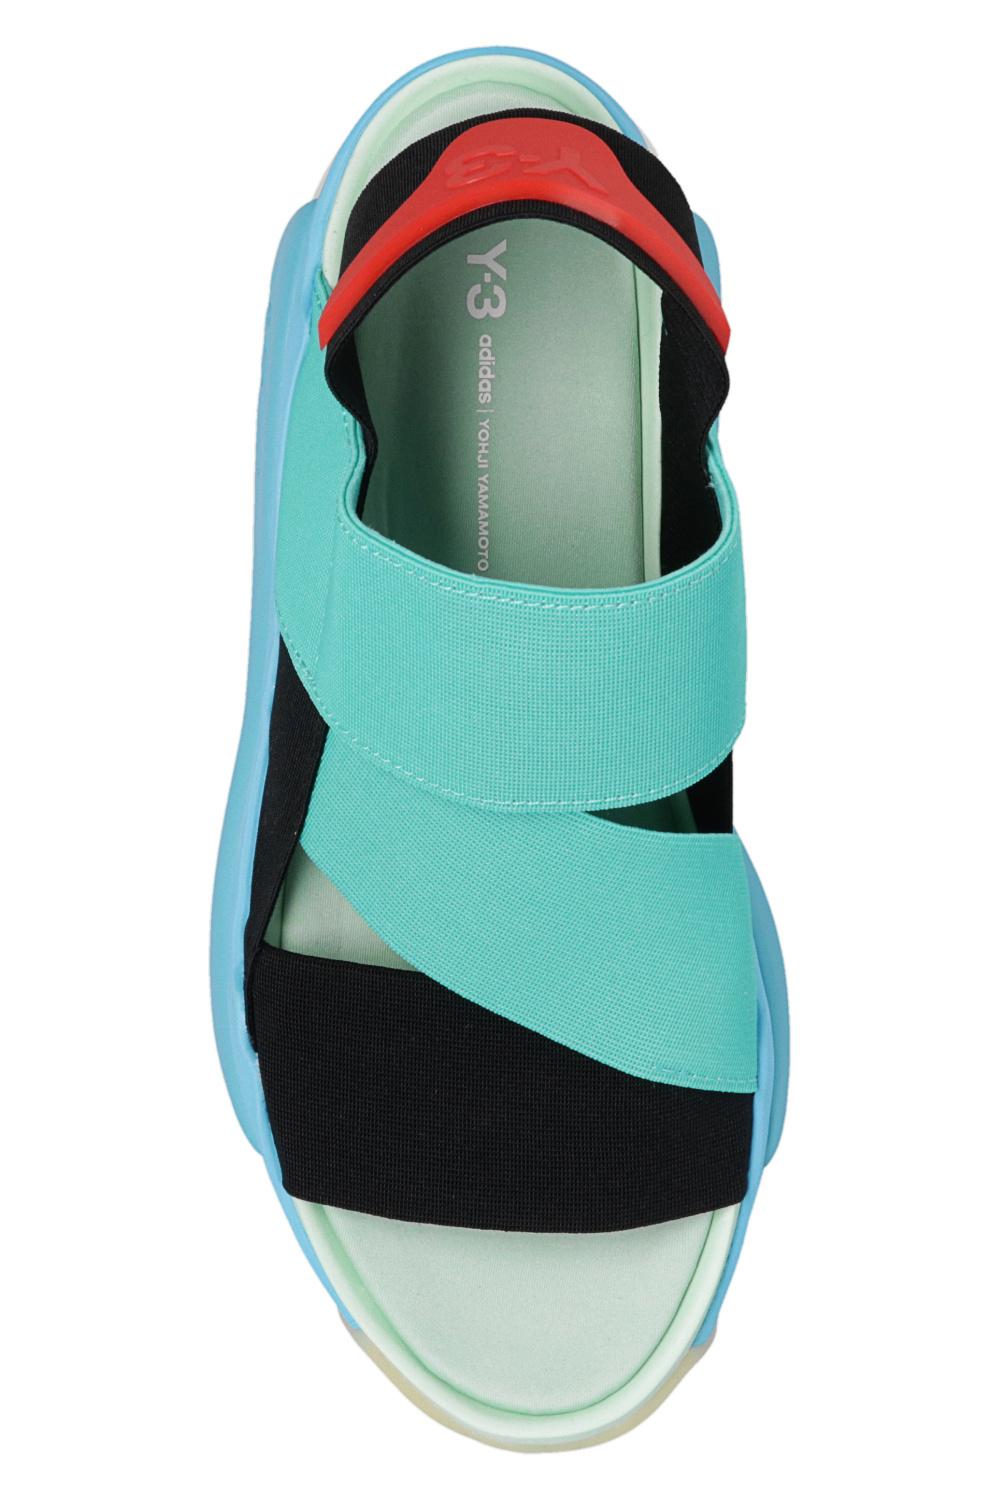 Blue - Save 3% Womens Flats and flat shoes Y-3 Flats and flat shoes Y-3 Sandalo Hokori in Black 